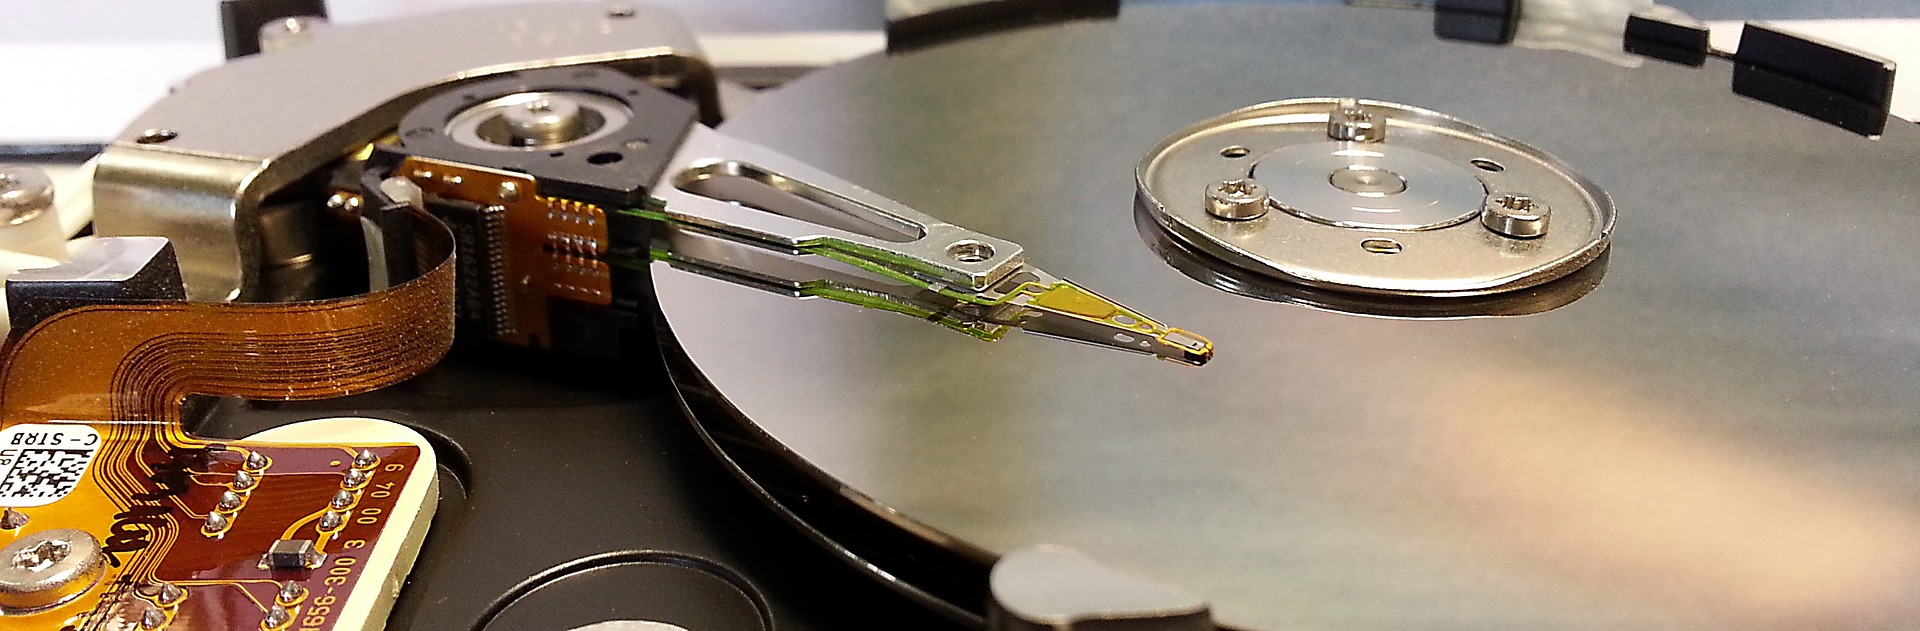 Data Recovery for your Data Storage Devices - Image 3